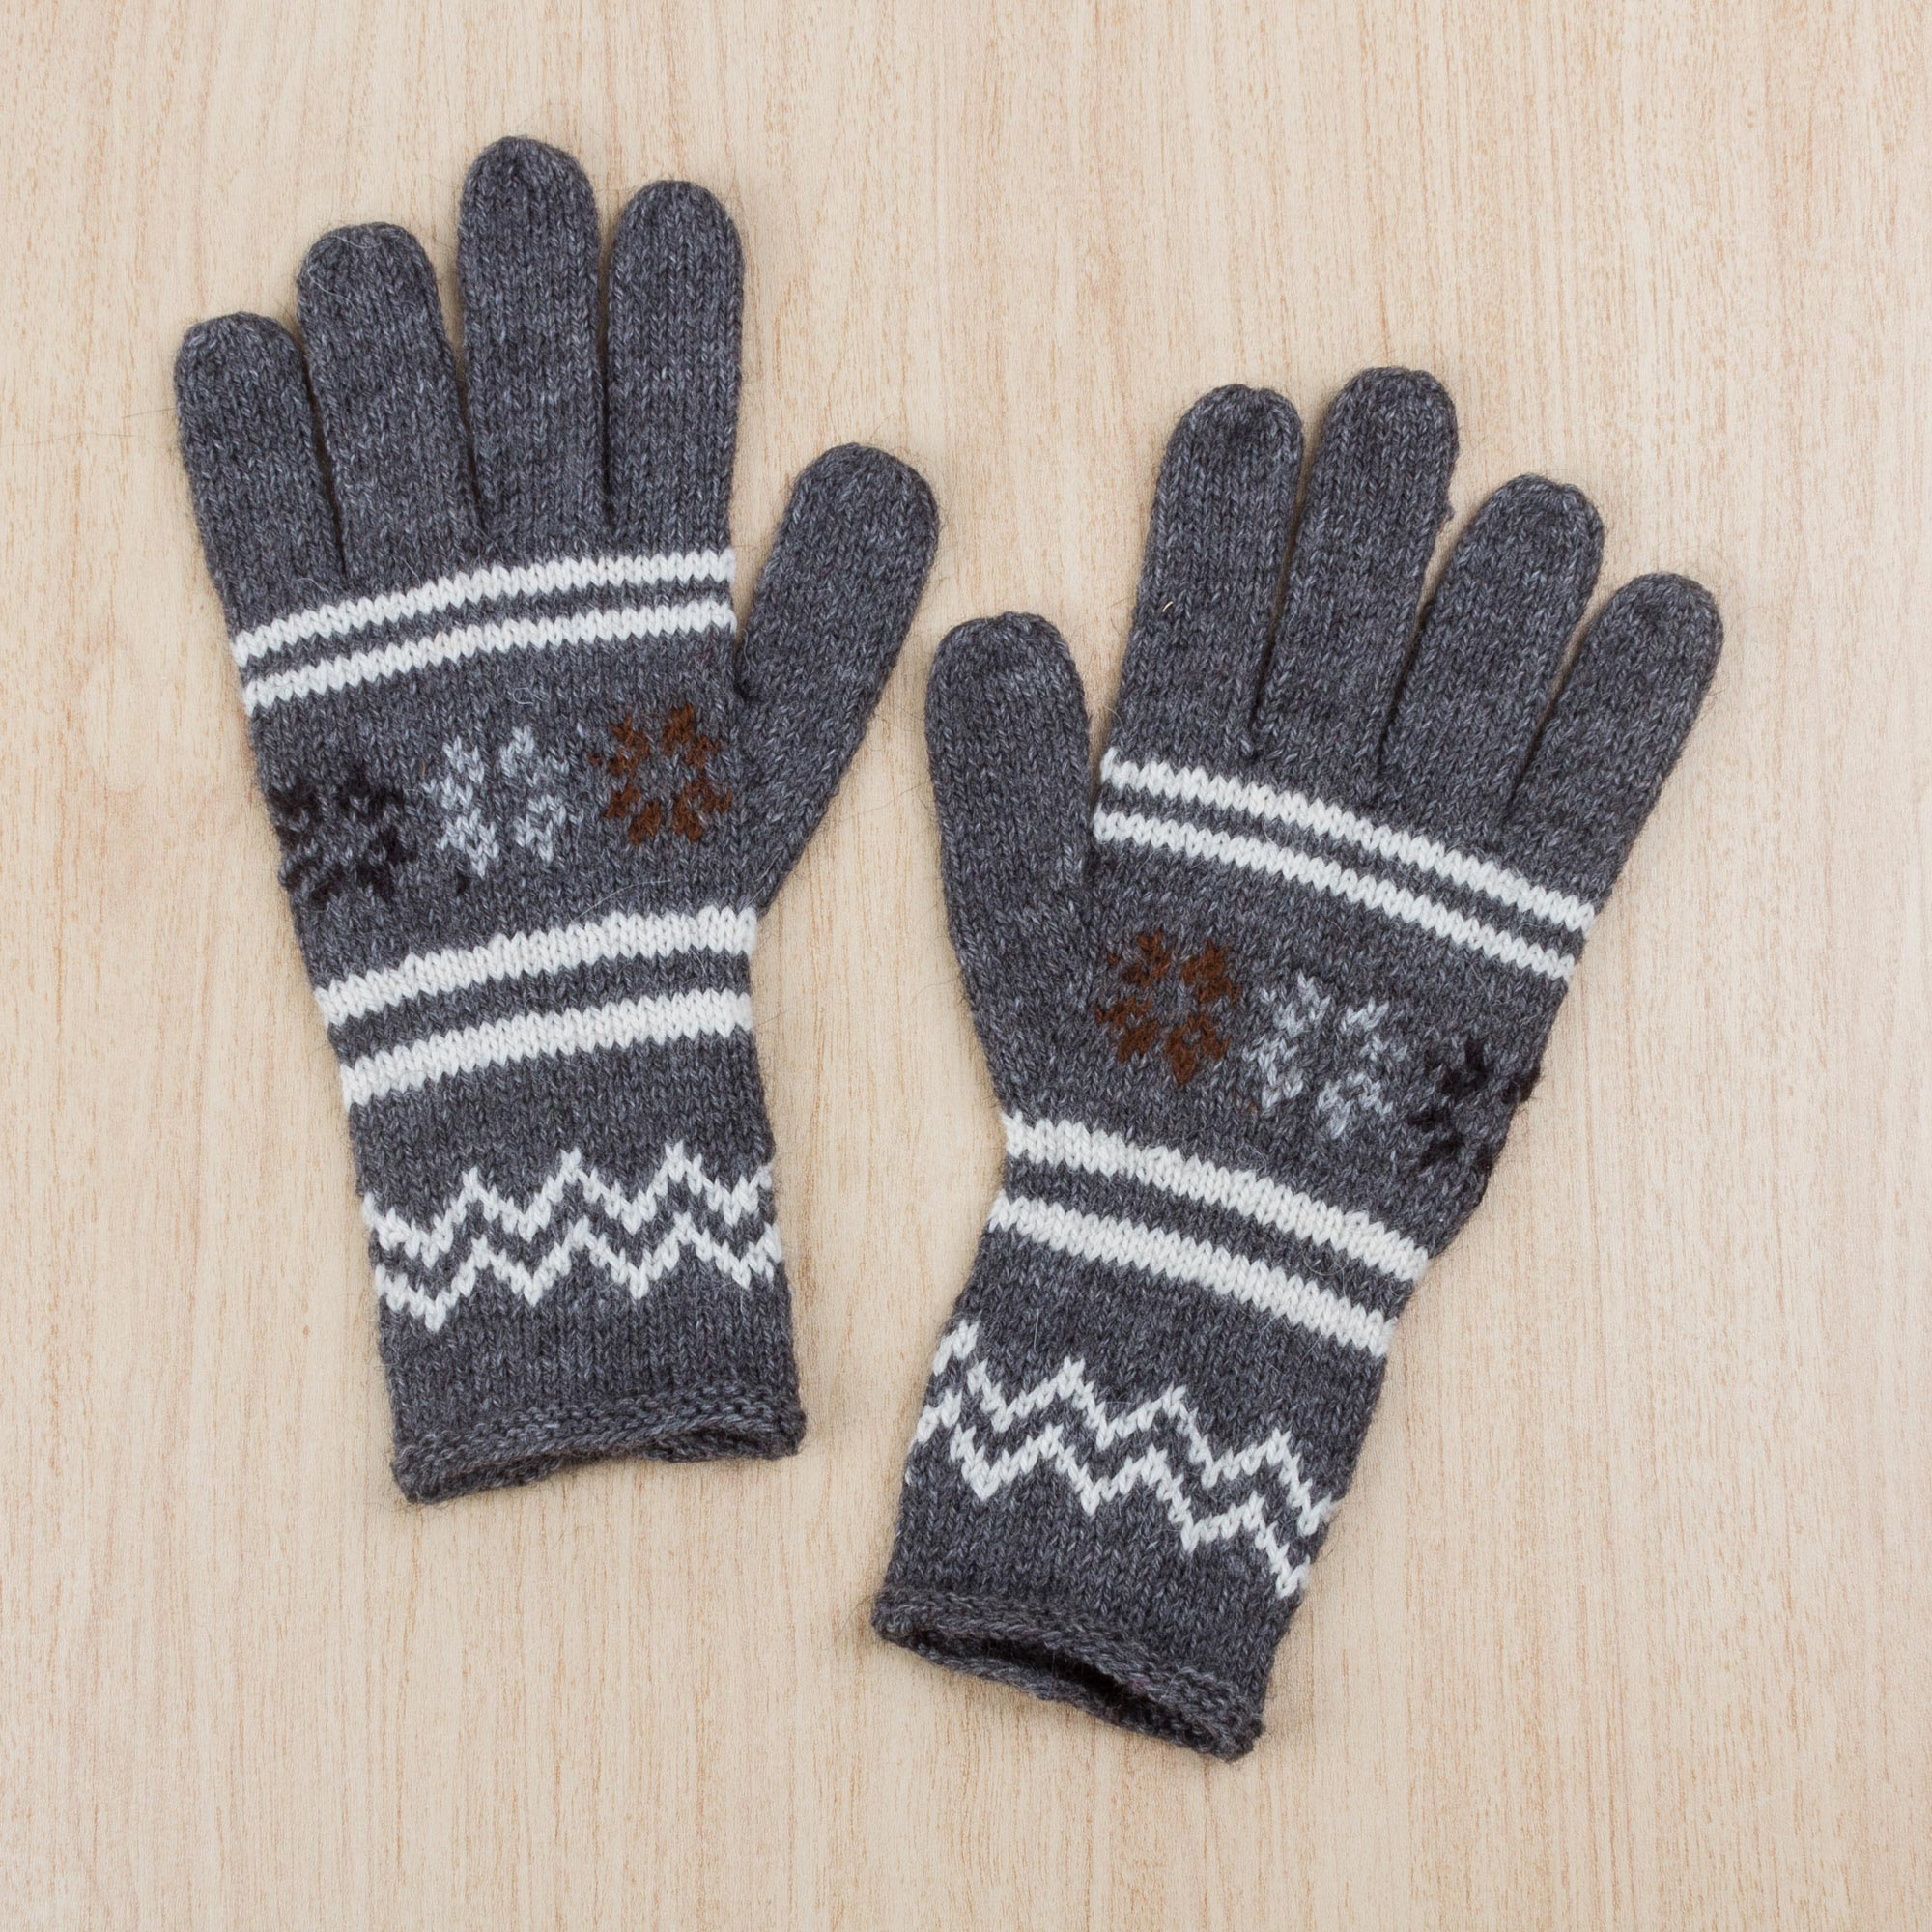 UNICEF Market | Alpaca Blend Gloves in Slate Grey and Ivory from Peru ...